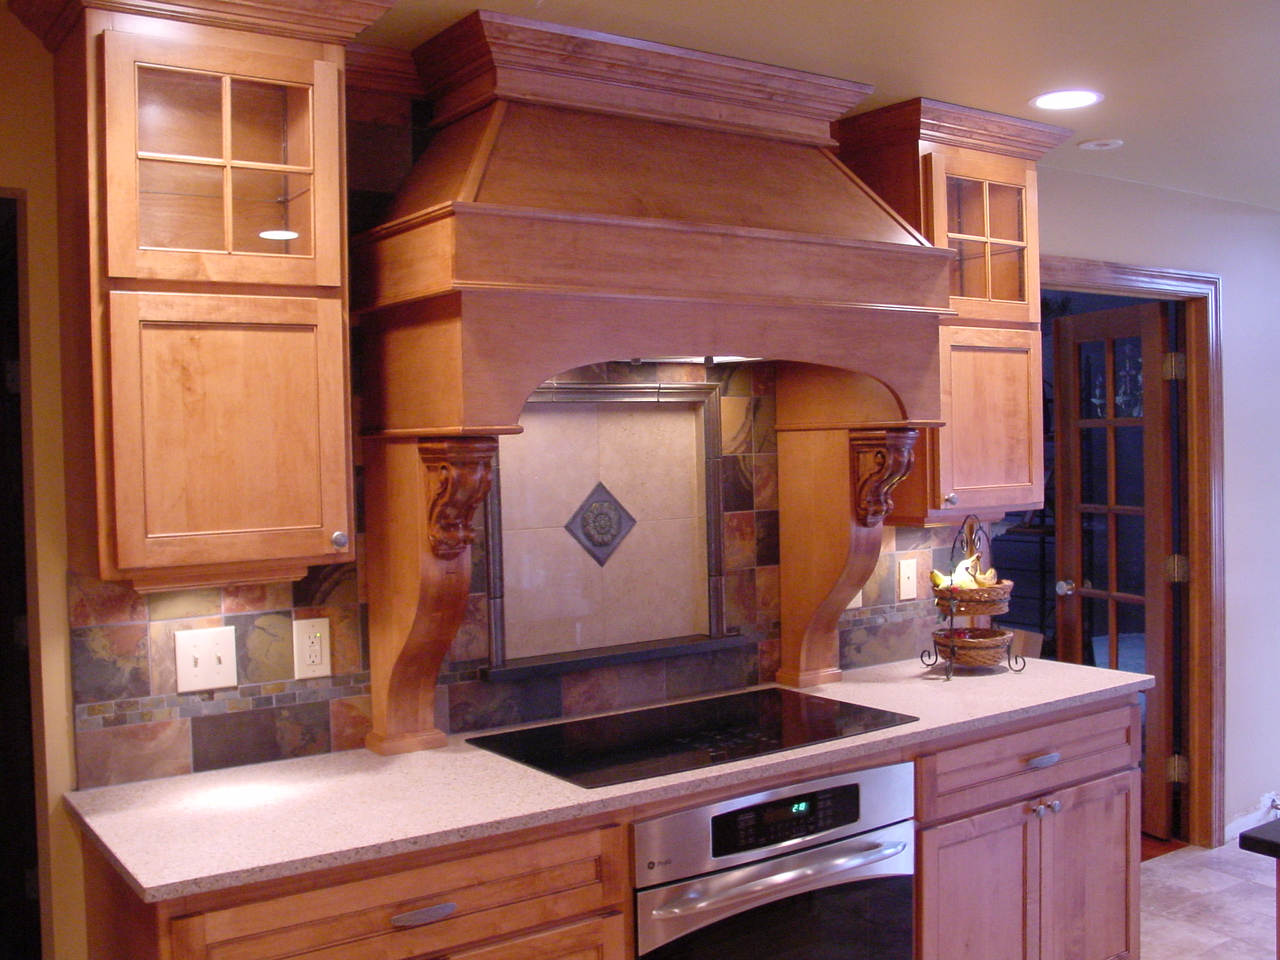 Custom wood hood in Maple Wood stain. Custom double doors with glass mullions and plenty of roll-out shelves. This great kitchen is located in Upper Bucks, Yardley, Lower Makefield area. All new wood kitchen cabinets.